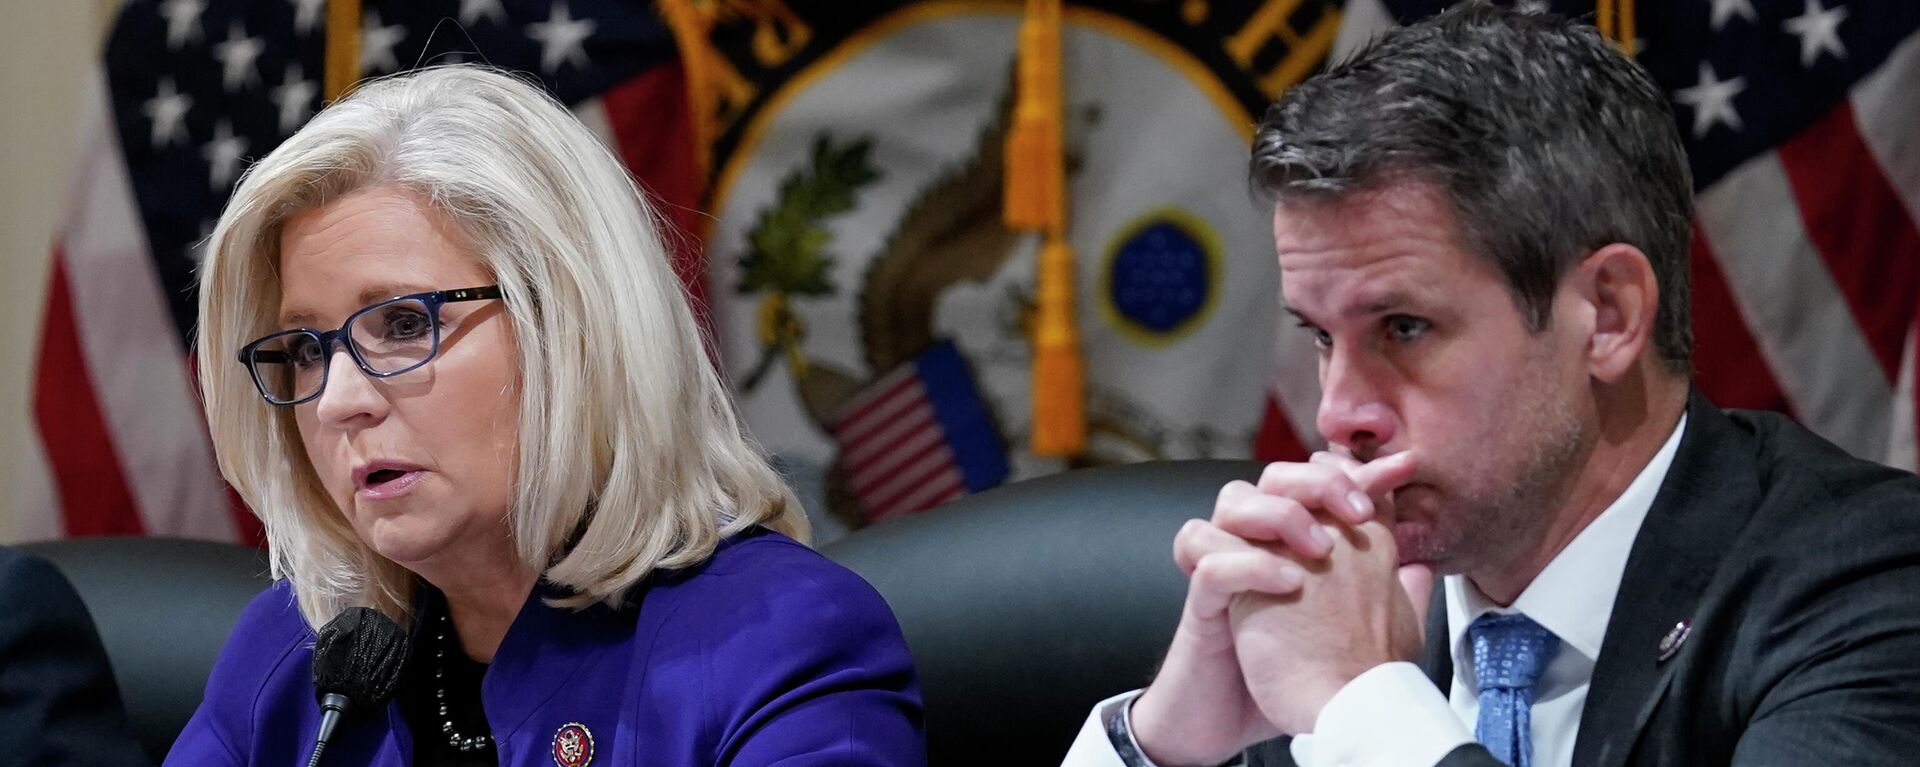 Rep. Liz Cheney, R-Wyo., and Rep. Adam Kinzinger, R-Ill., listen as the House select committee tasked with investigating the Jan. 6 attack on the U.S. Capitol meets to hold Steve Bannon, one of former President Donald Trump's allies in contempt, on Capitol Hill in Washington, Tuesday, Oct. 19, 2021 - Sputnik International, 1920, 16.12.2021